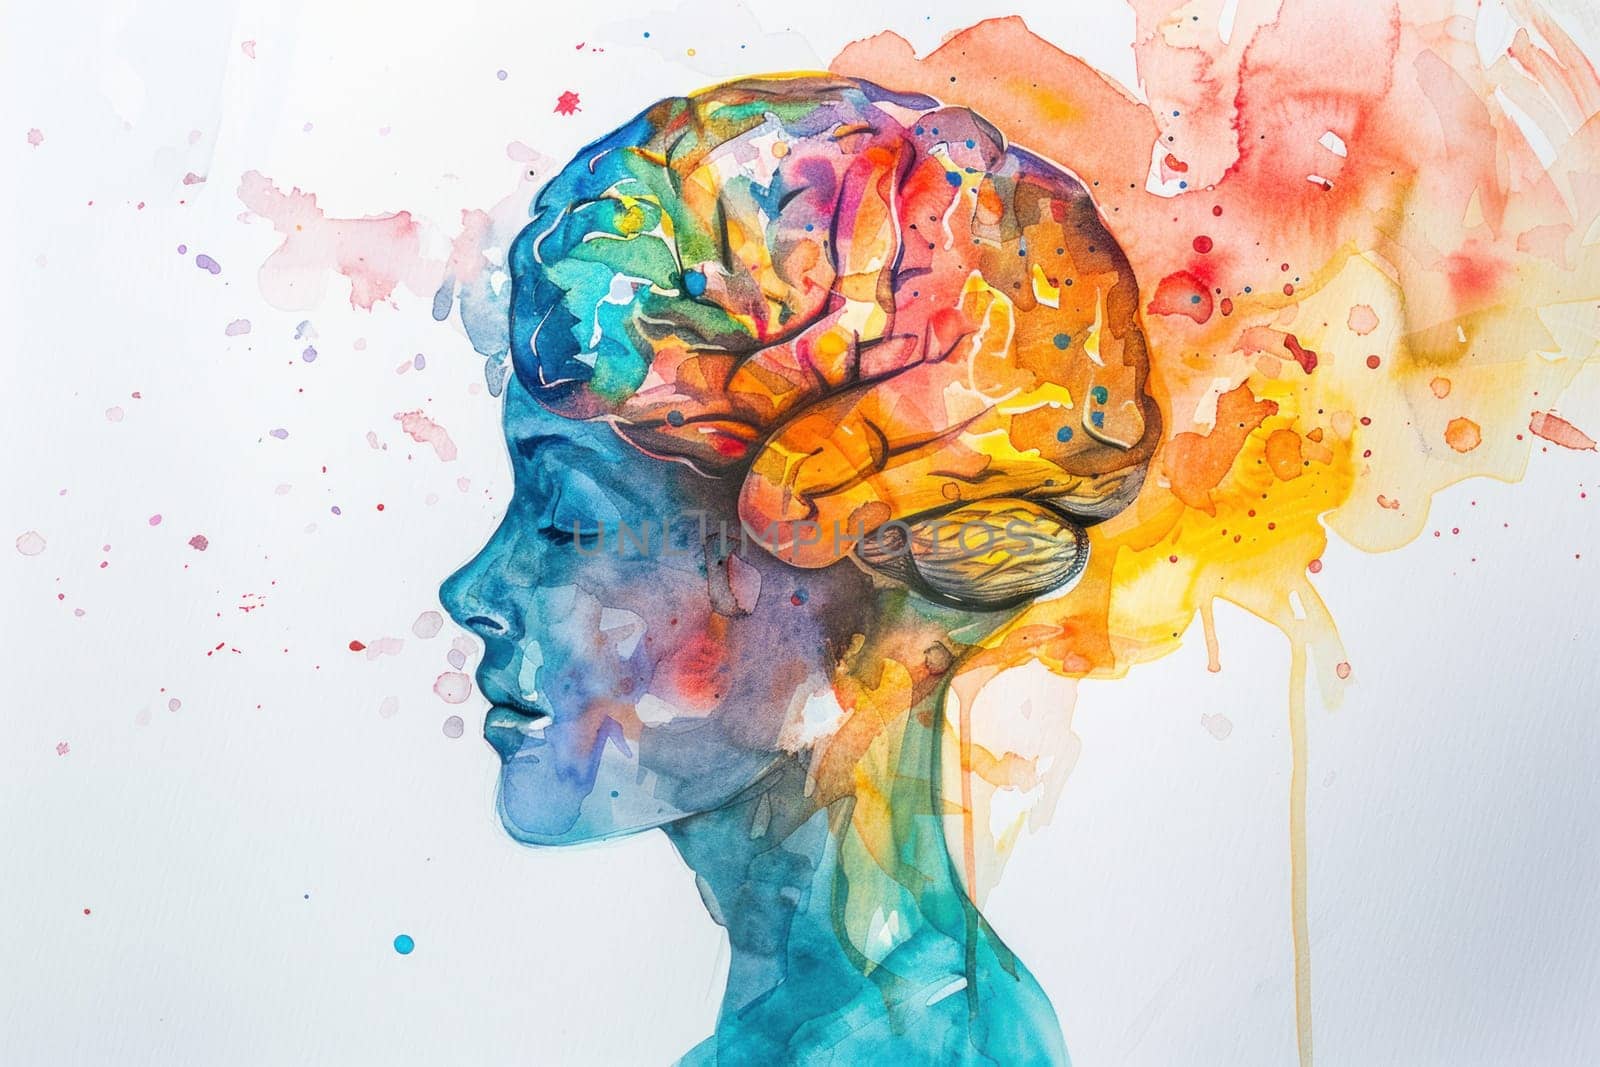 Watercolor painting of a woman's head with brain in center, exploring the intersection of beauty and science by Vichizh